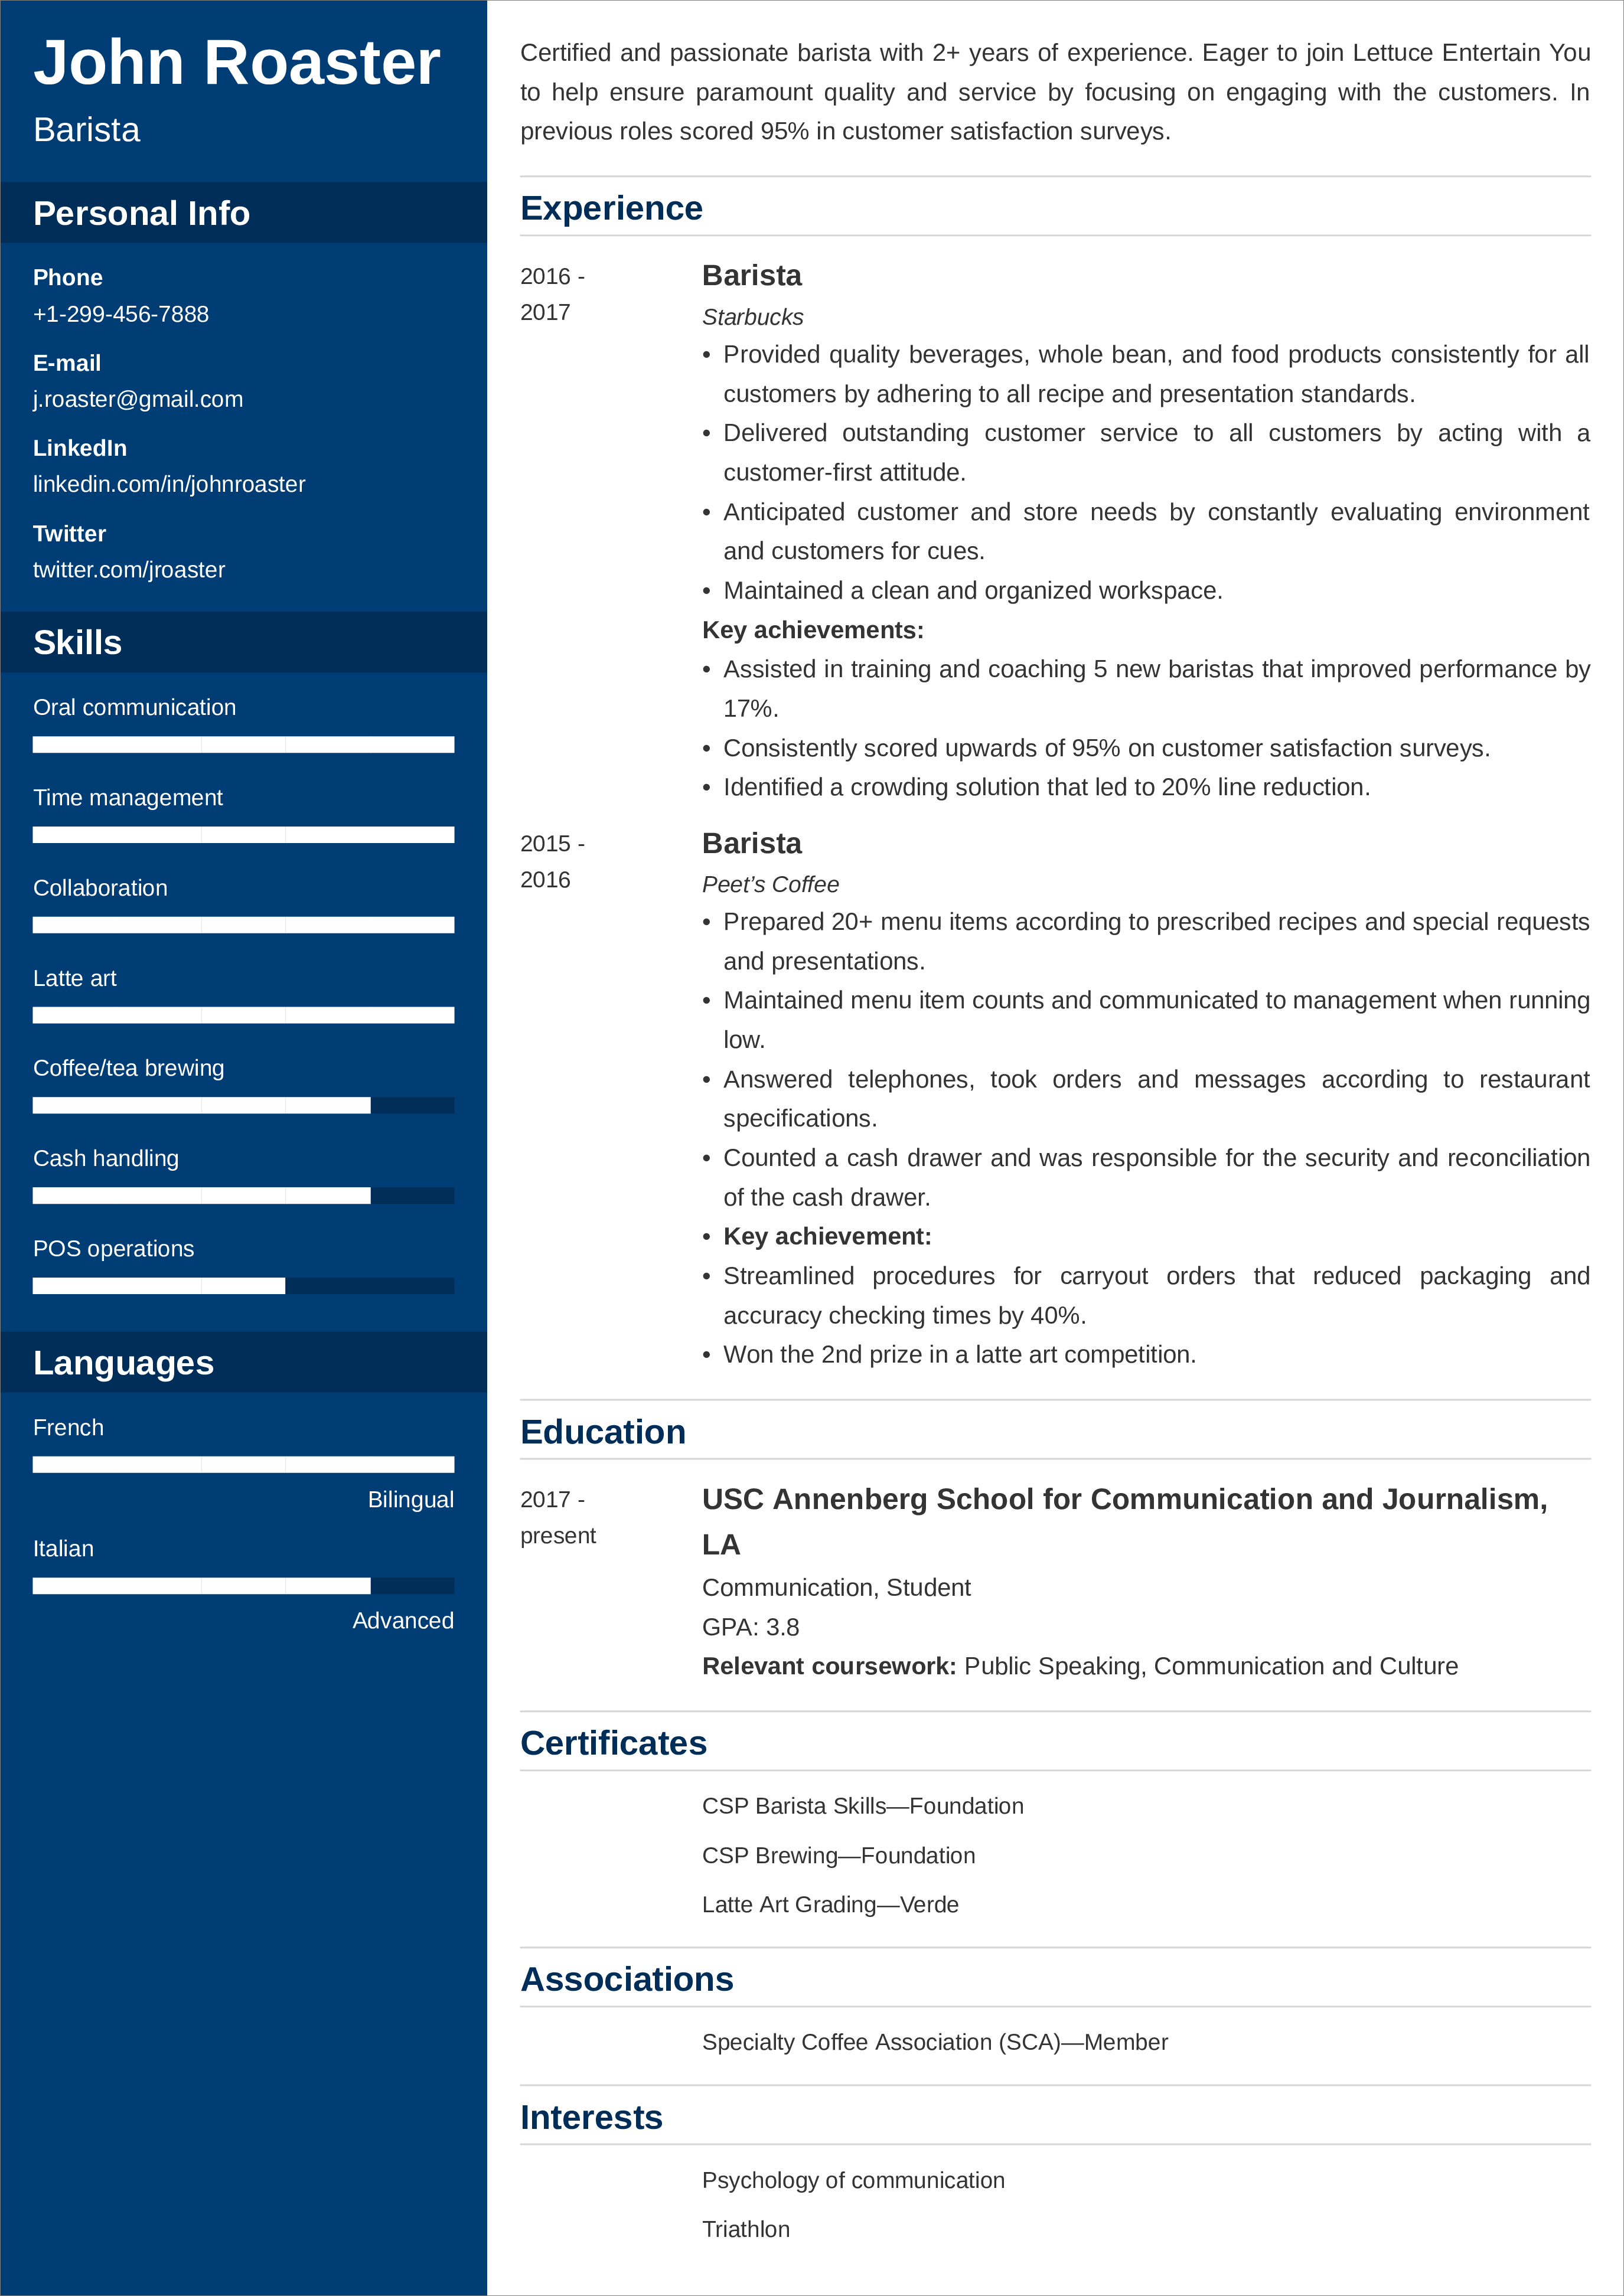 List of Hobbies and Interests to Put on a Resume or CV (28 Examples)